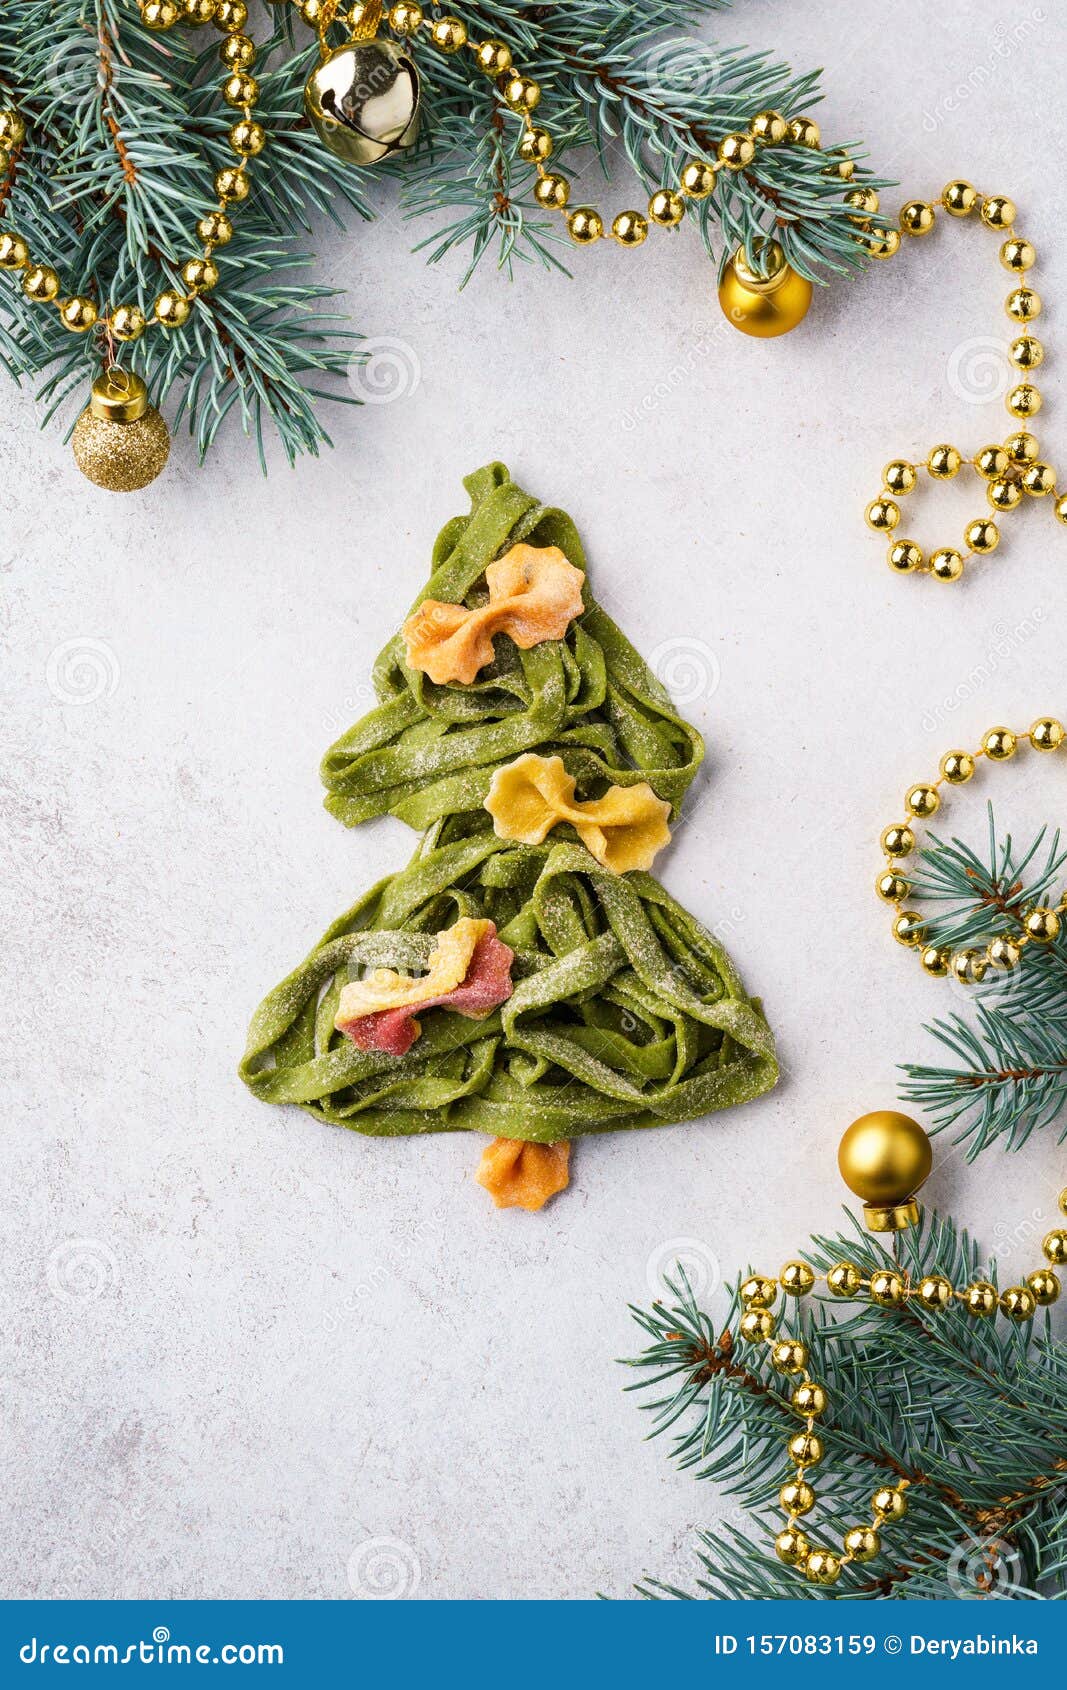 Christmas Tree Made Of Fresh Homemade Spinach Pasta Stock Image - Image of holiday, layout ...